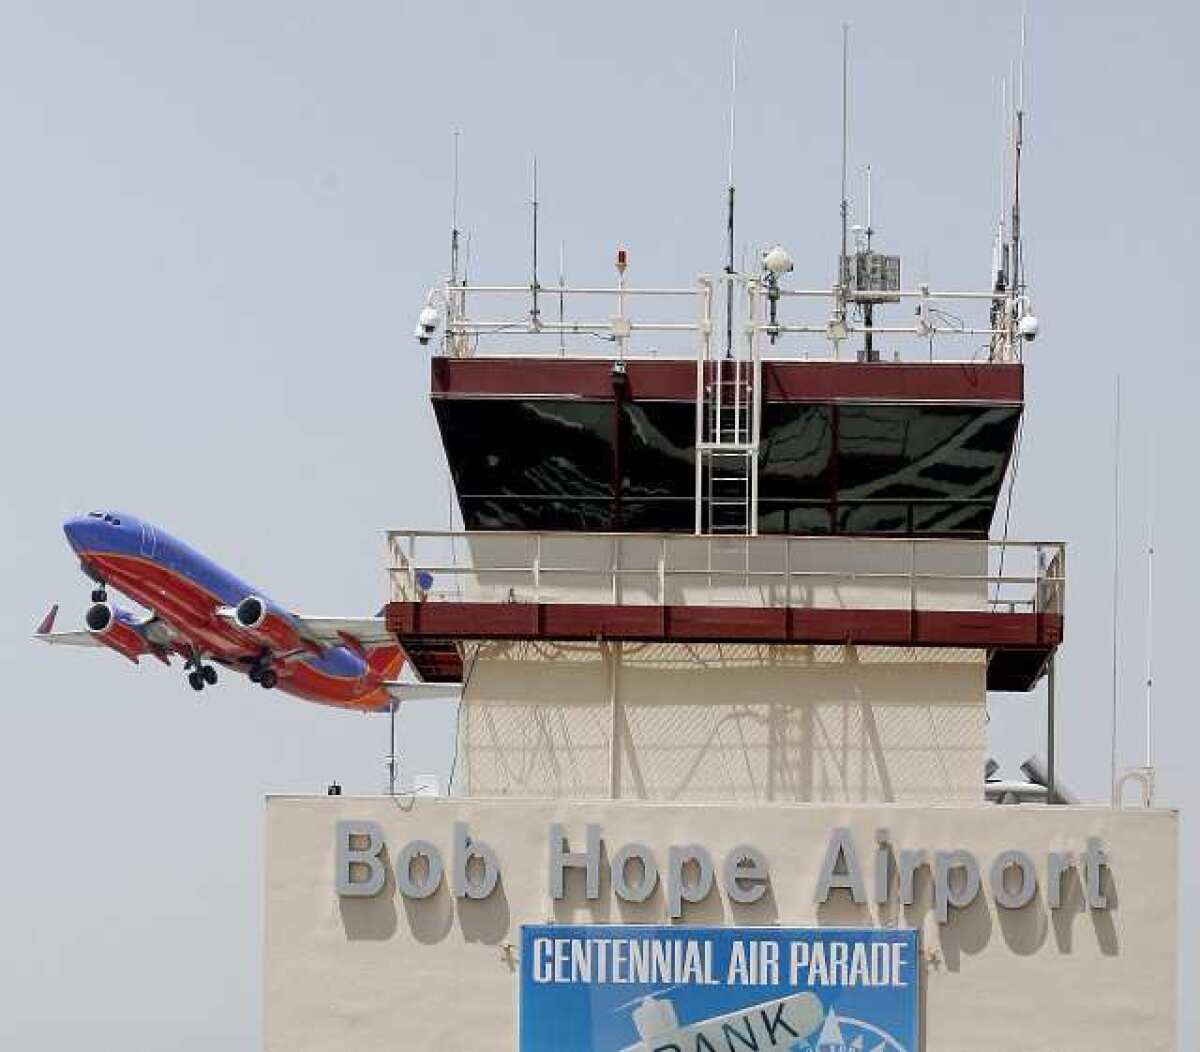 Bob Hope Airport commissioners have increased landing fees for the first time in almost 10 years.